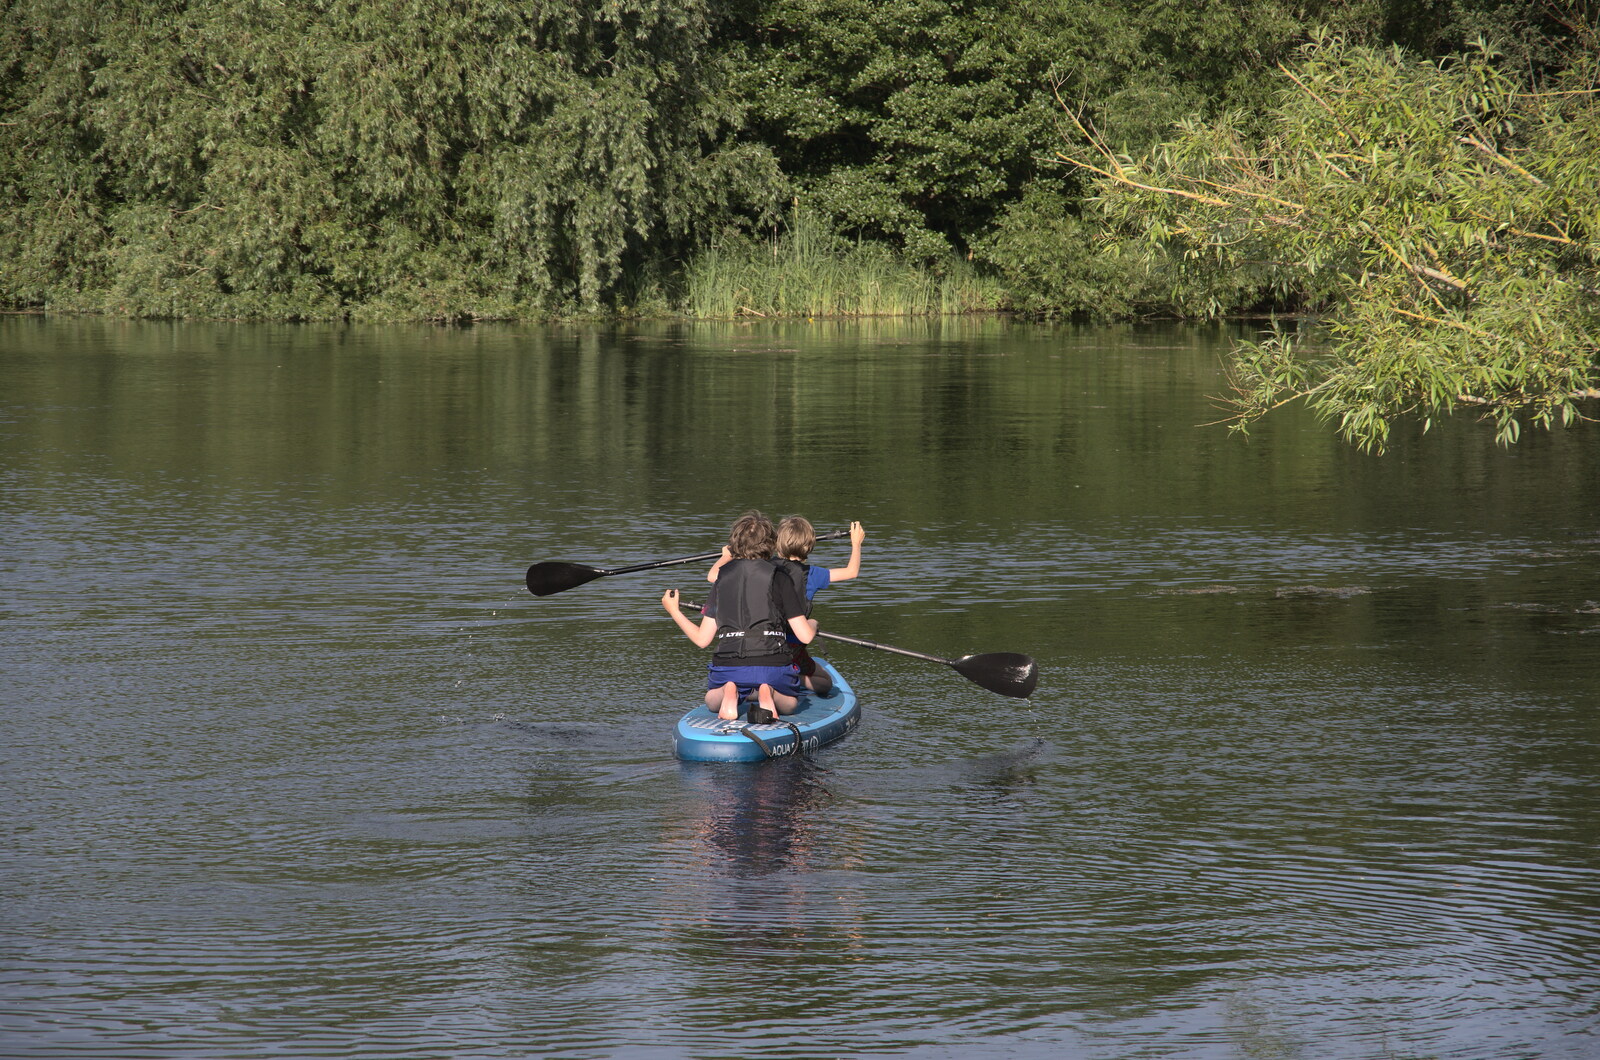 Fred and Harry get a go on a paddle board from Camping at the Lake, Weybread, Harleston - 25th June 2022